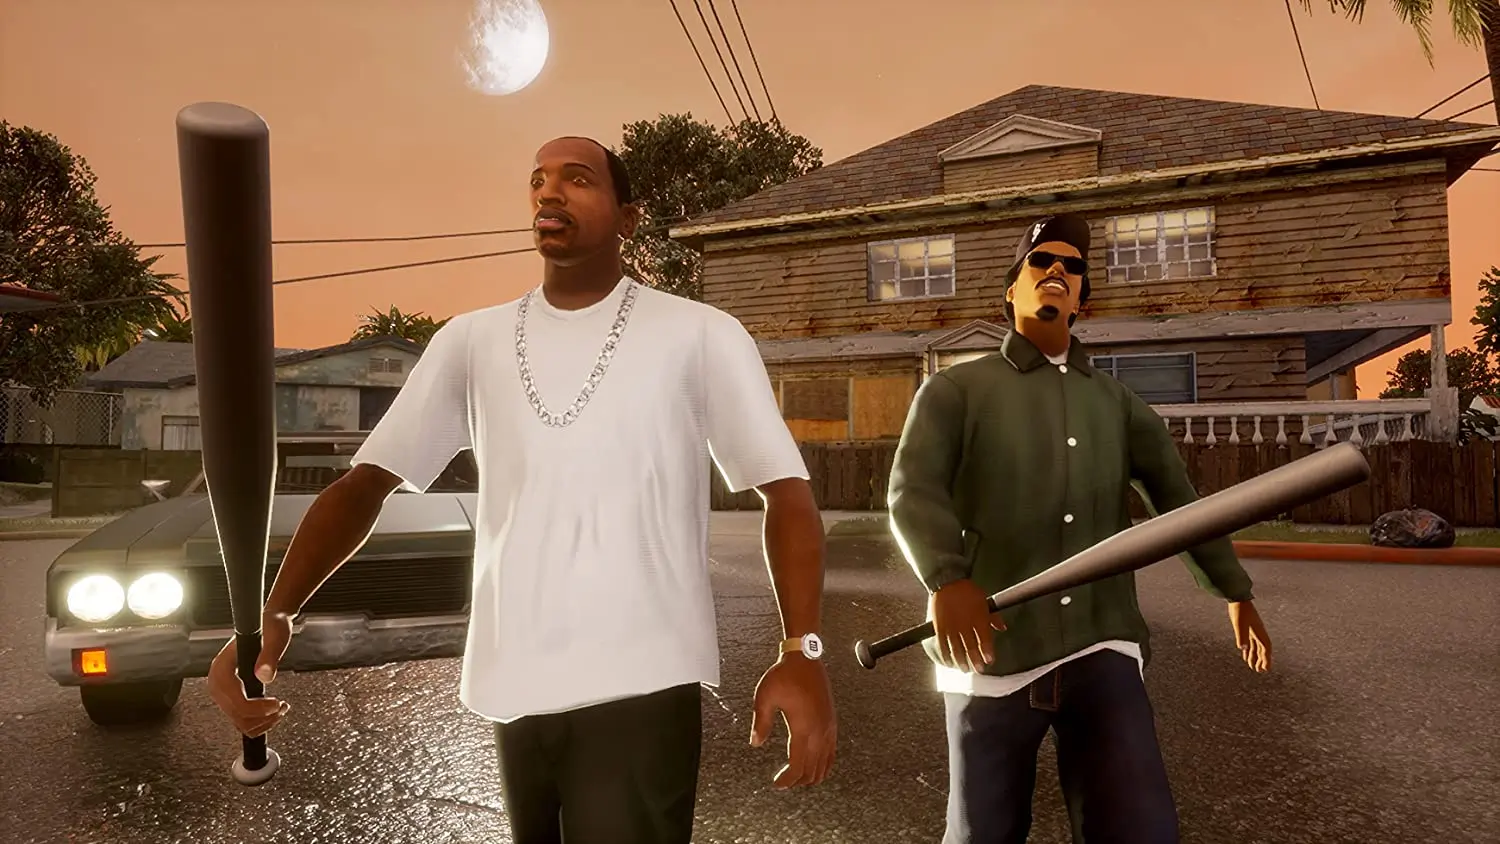 GTA San Andreas VR Release Still in the Works